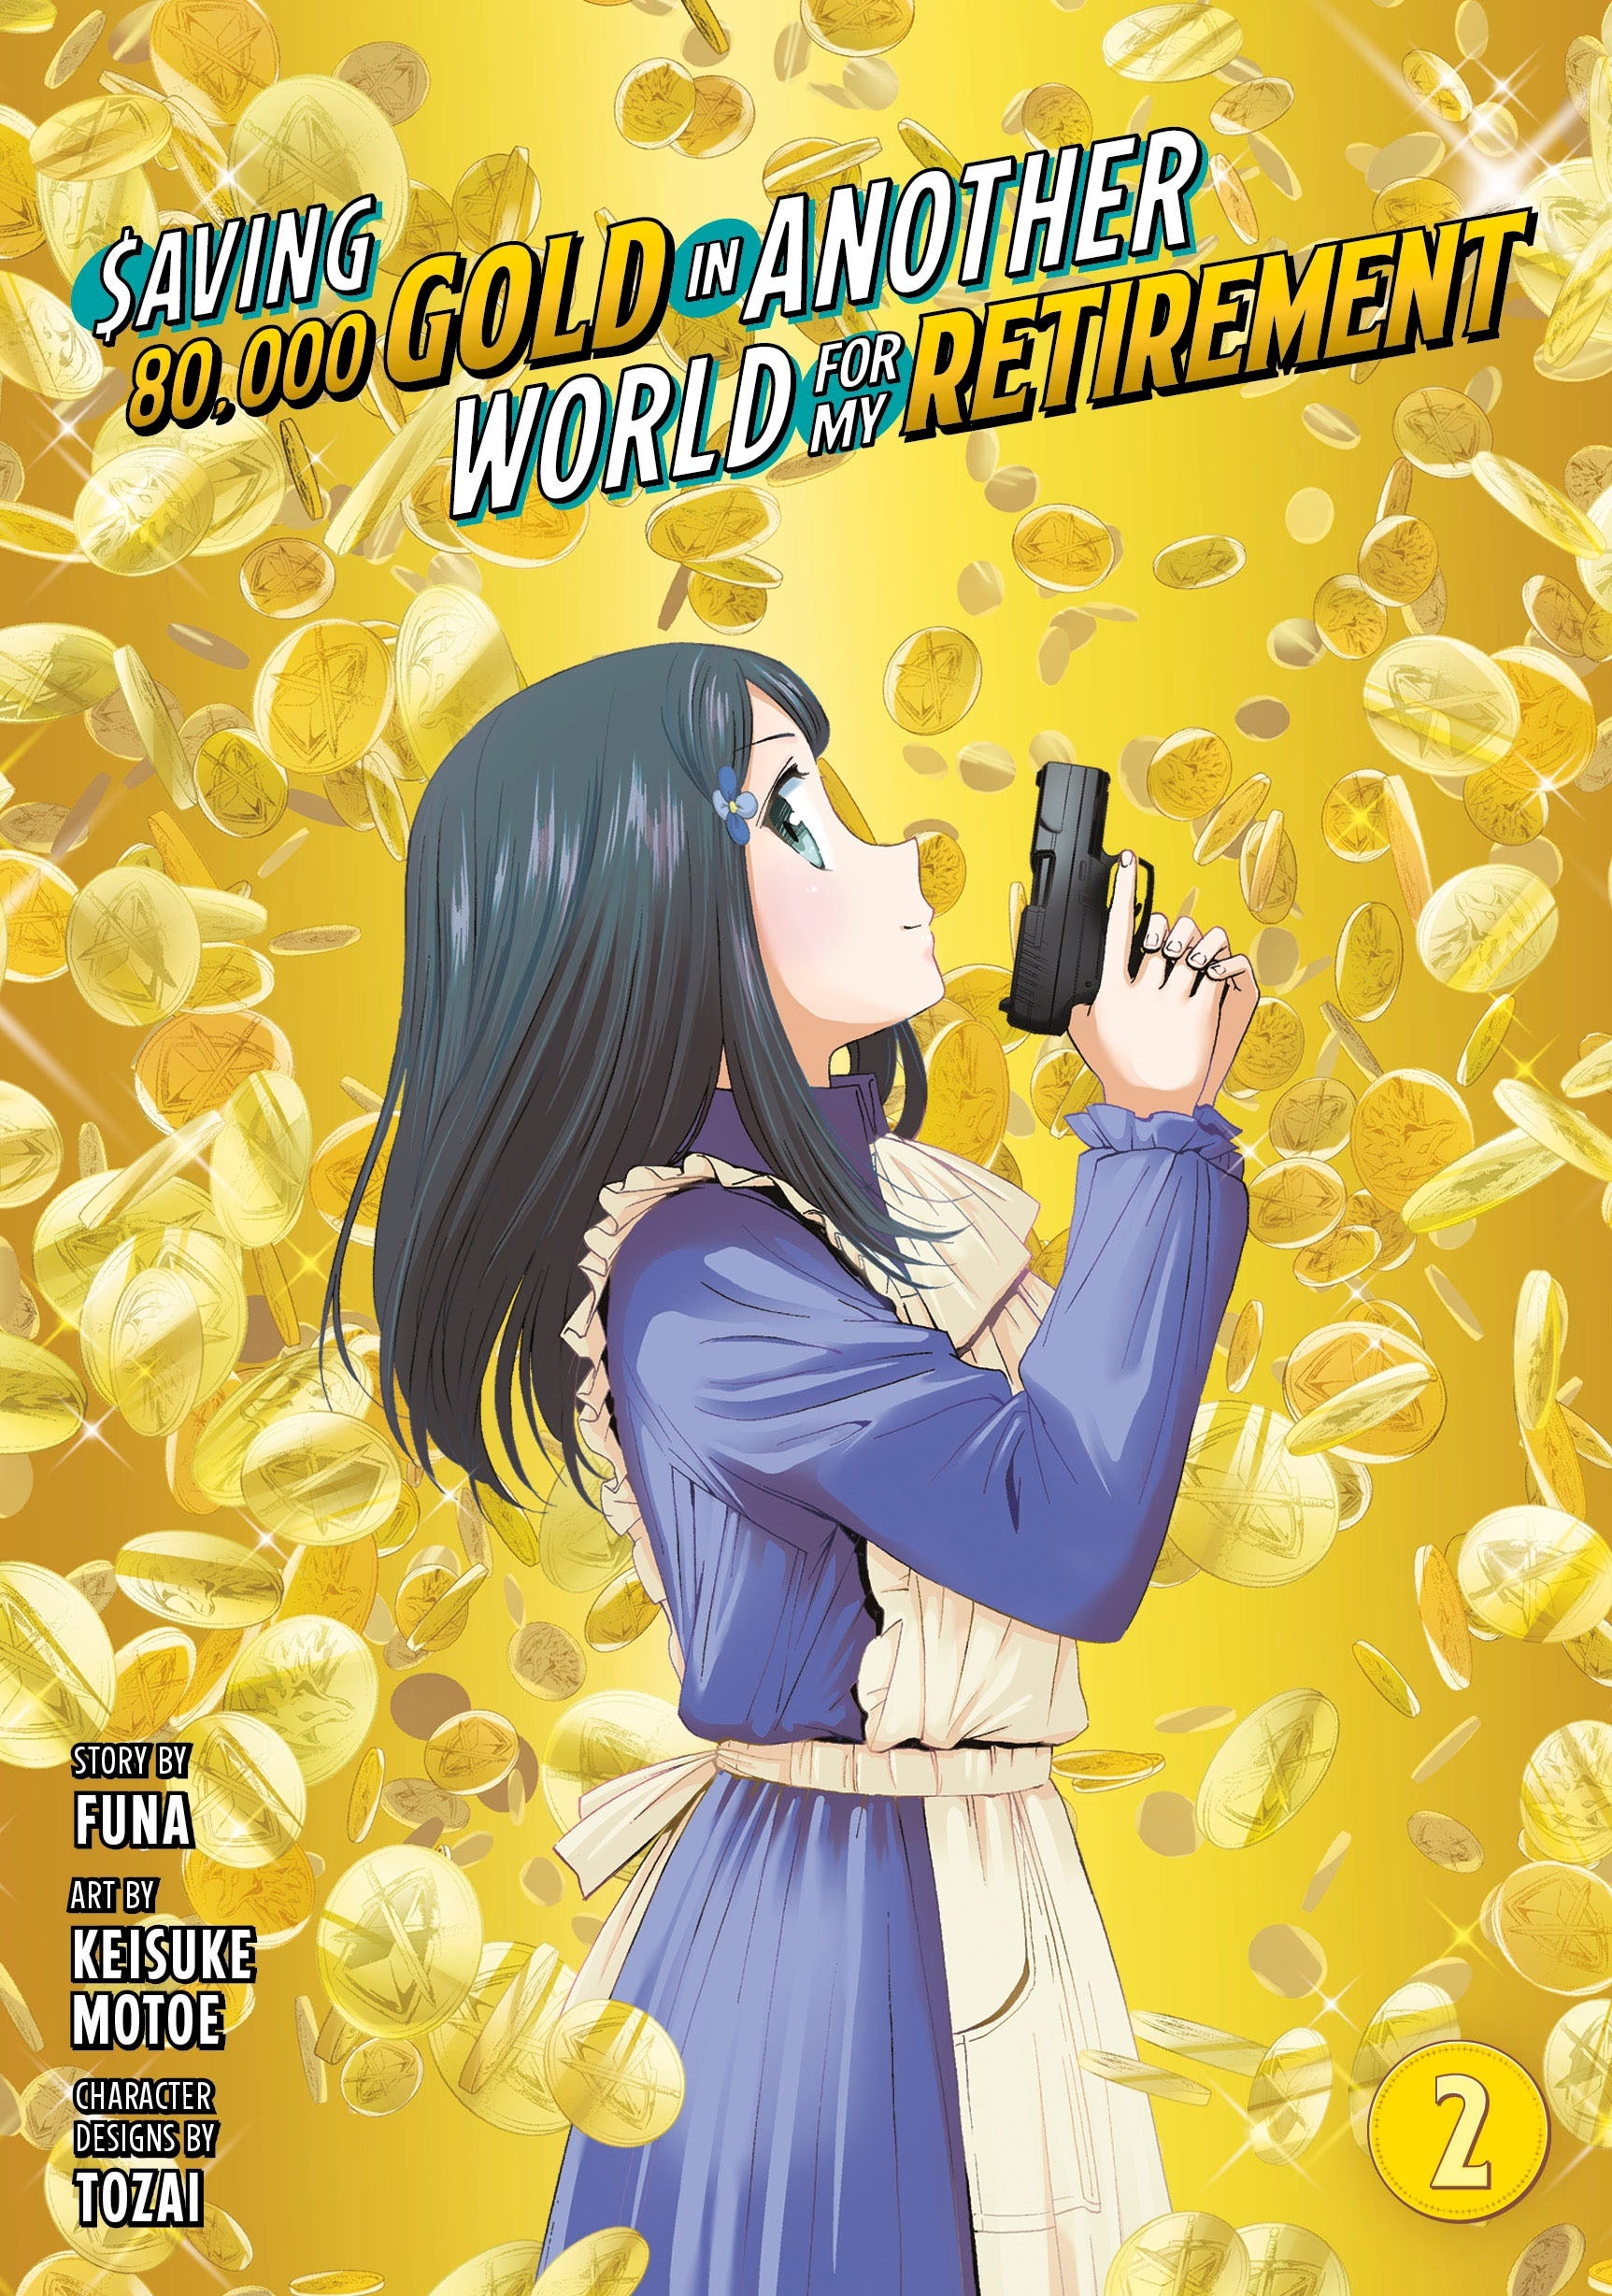 Saving 80,000 Gold in Another World for My Retirement, Vol. 2 (Manga)